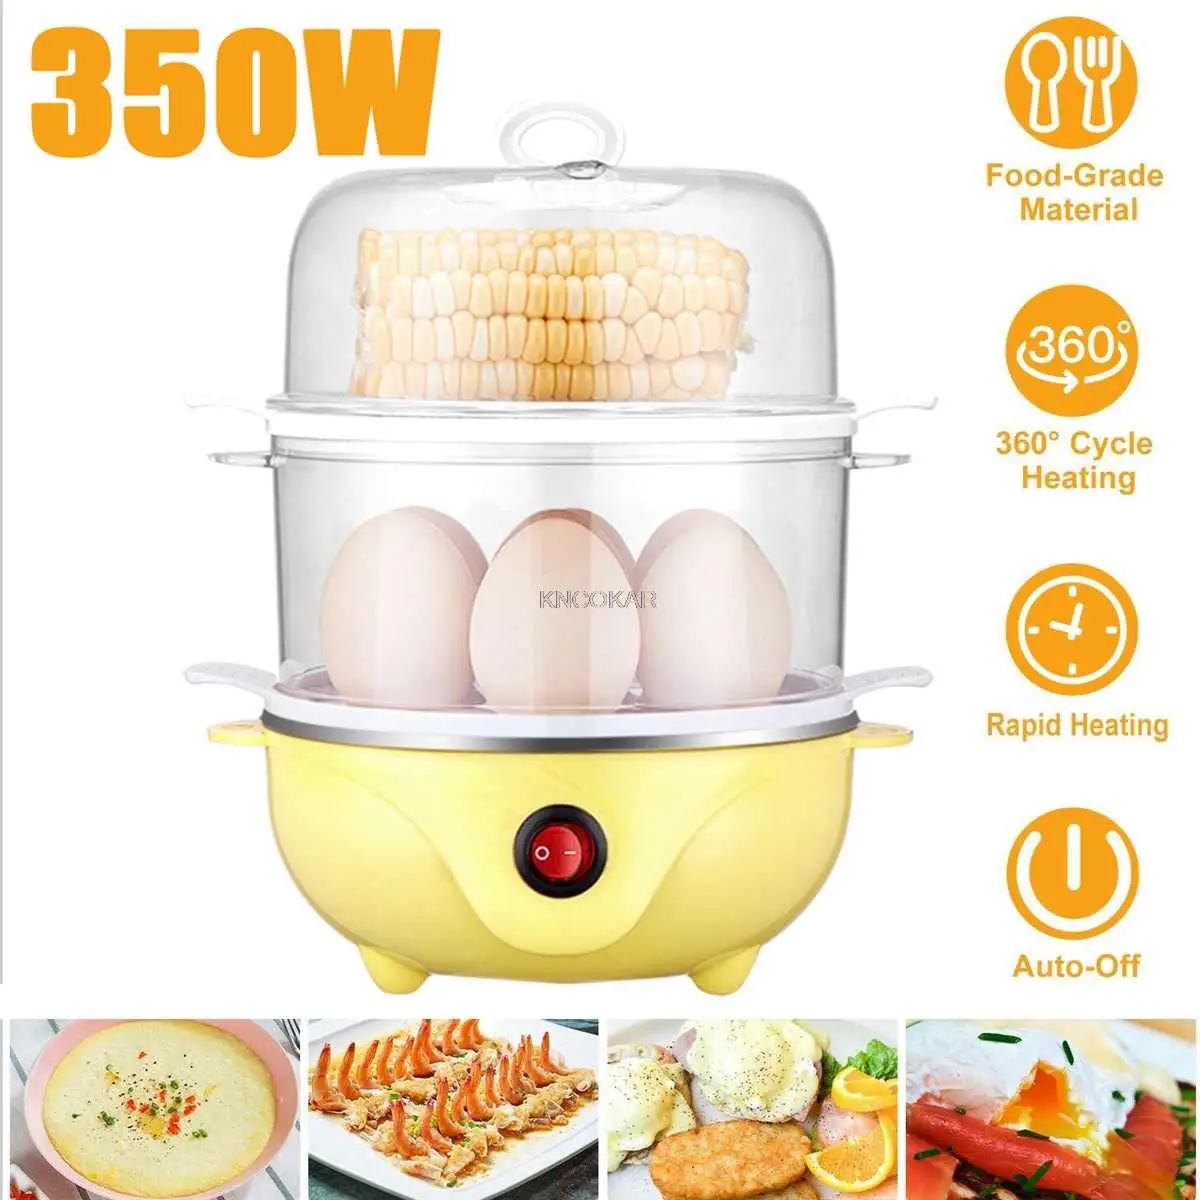 2 Slots Microwave Oven Egg Steamer Poacher Cooker Kitchen Tool Random Color Practical and Attractive 